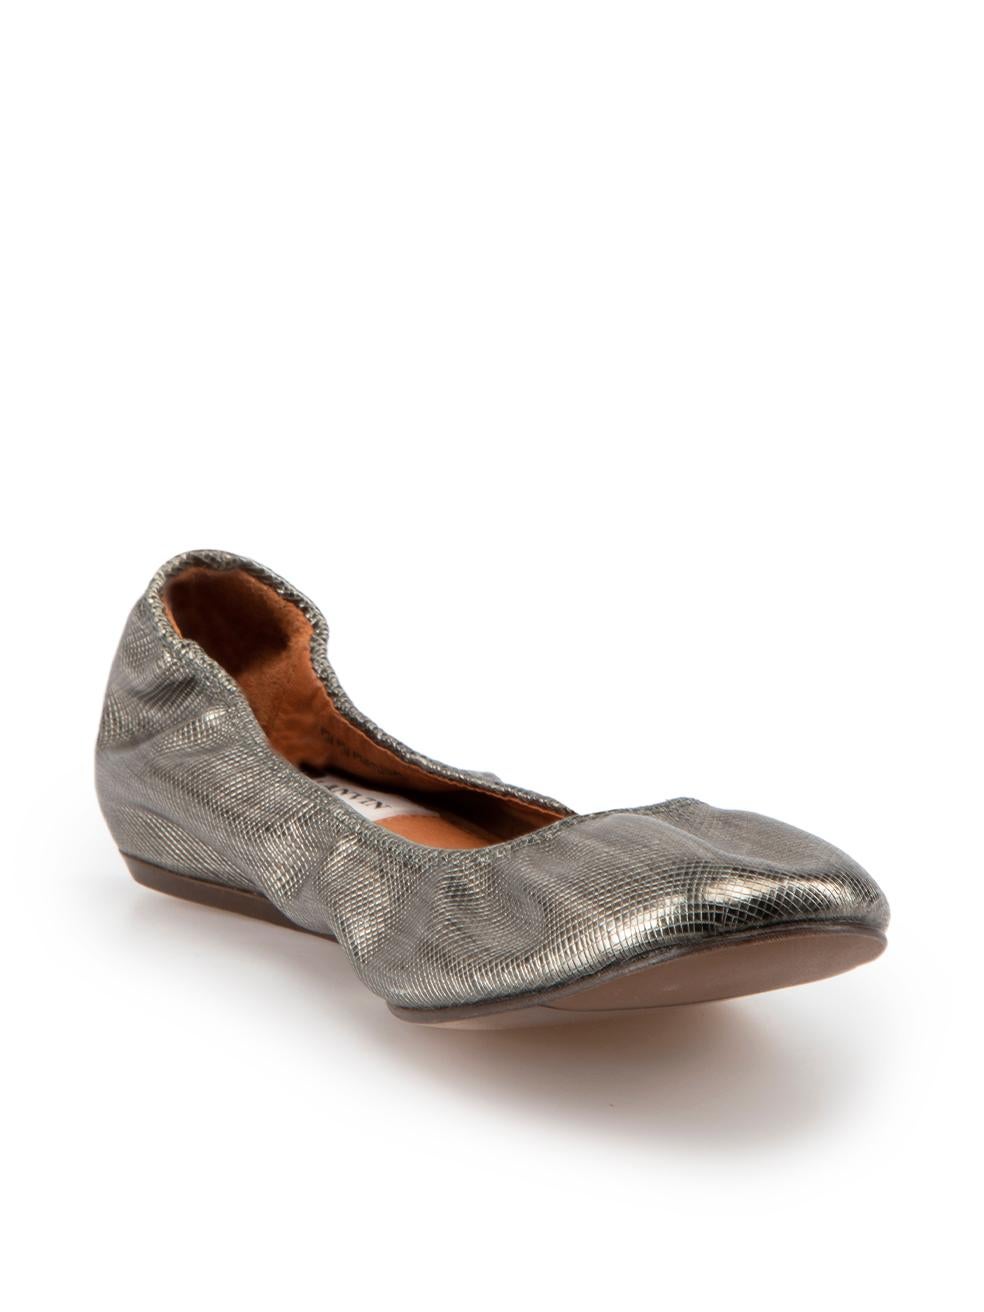 CONDITION is Good. Minor wear to flats is evident. Light wear to uppers with minimal abrasion of leather finish found around the top line, hardly any scuffing seen on the outsoles of this used Lanvin designer resale item.

Details
Silver